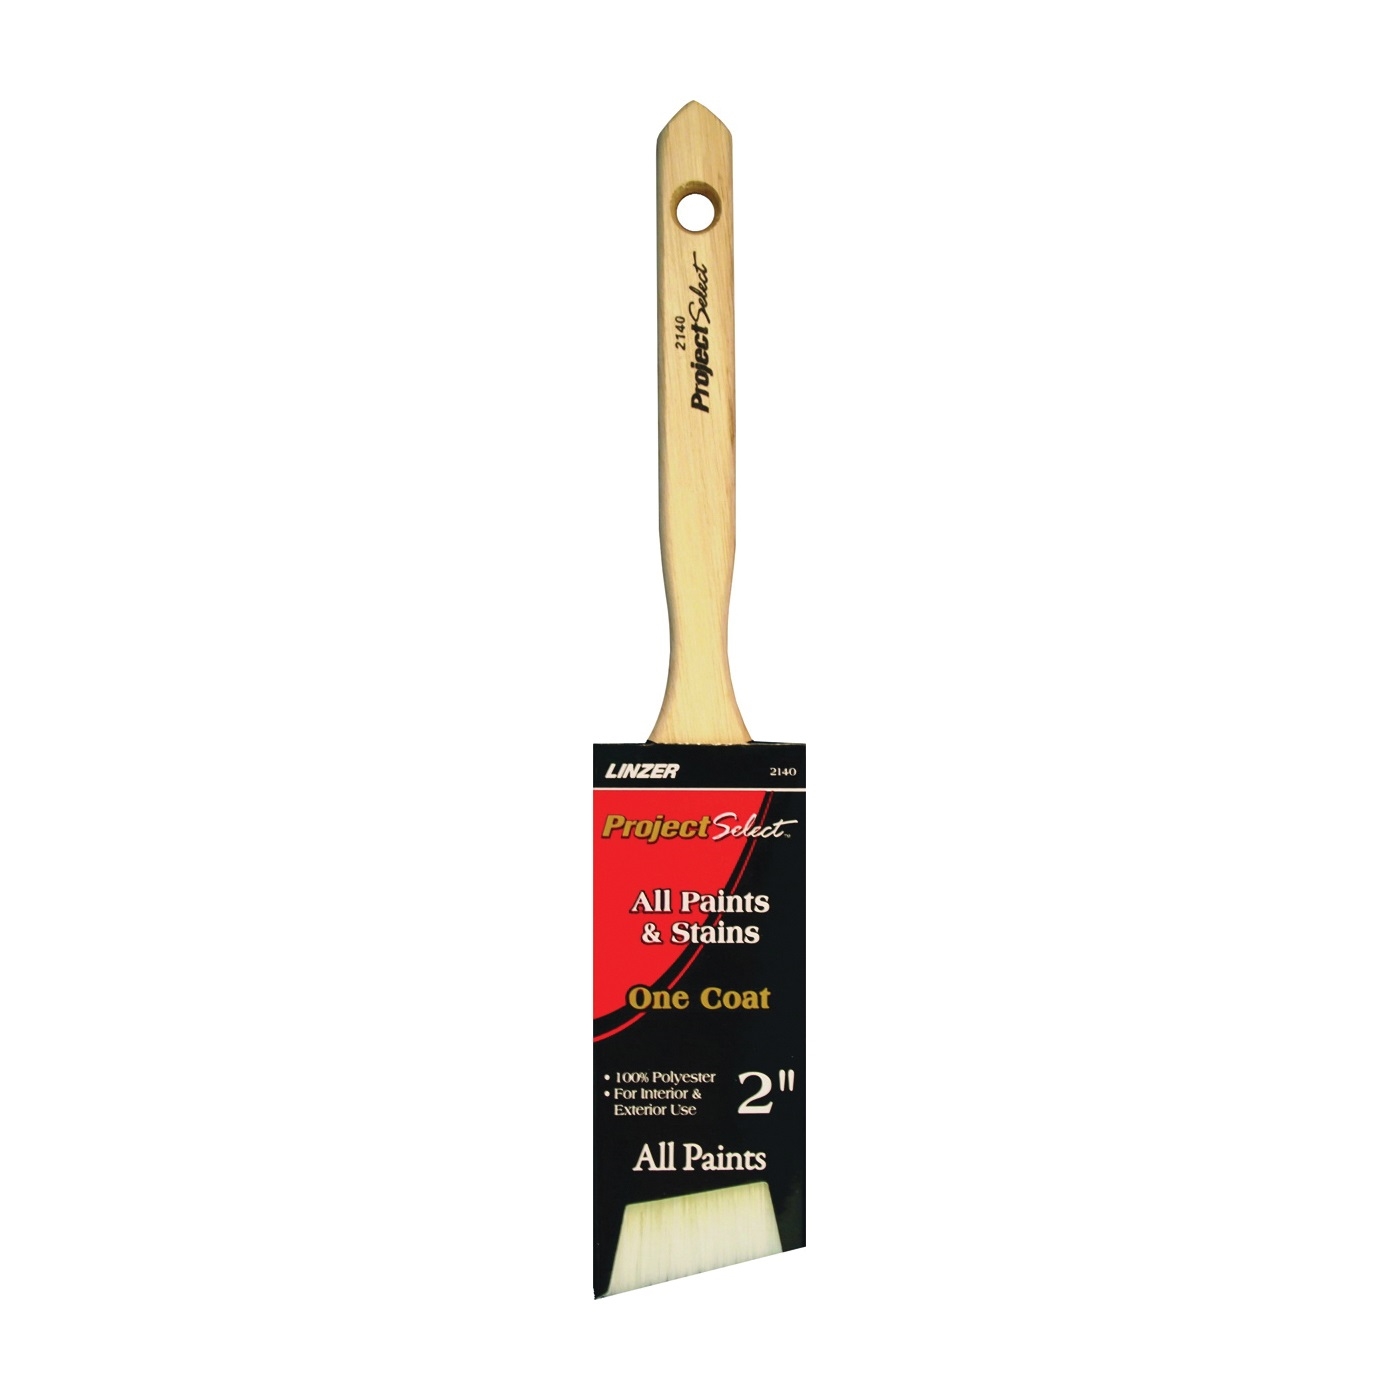 WC 2140-2 Paint Brush, 2 in W, 2-3/4 in L Bristle, Polyester Bristle, Sash Handle